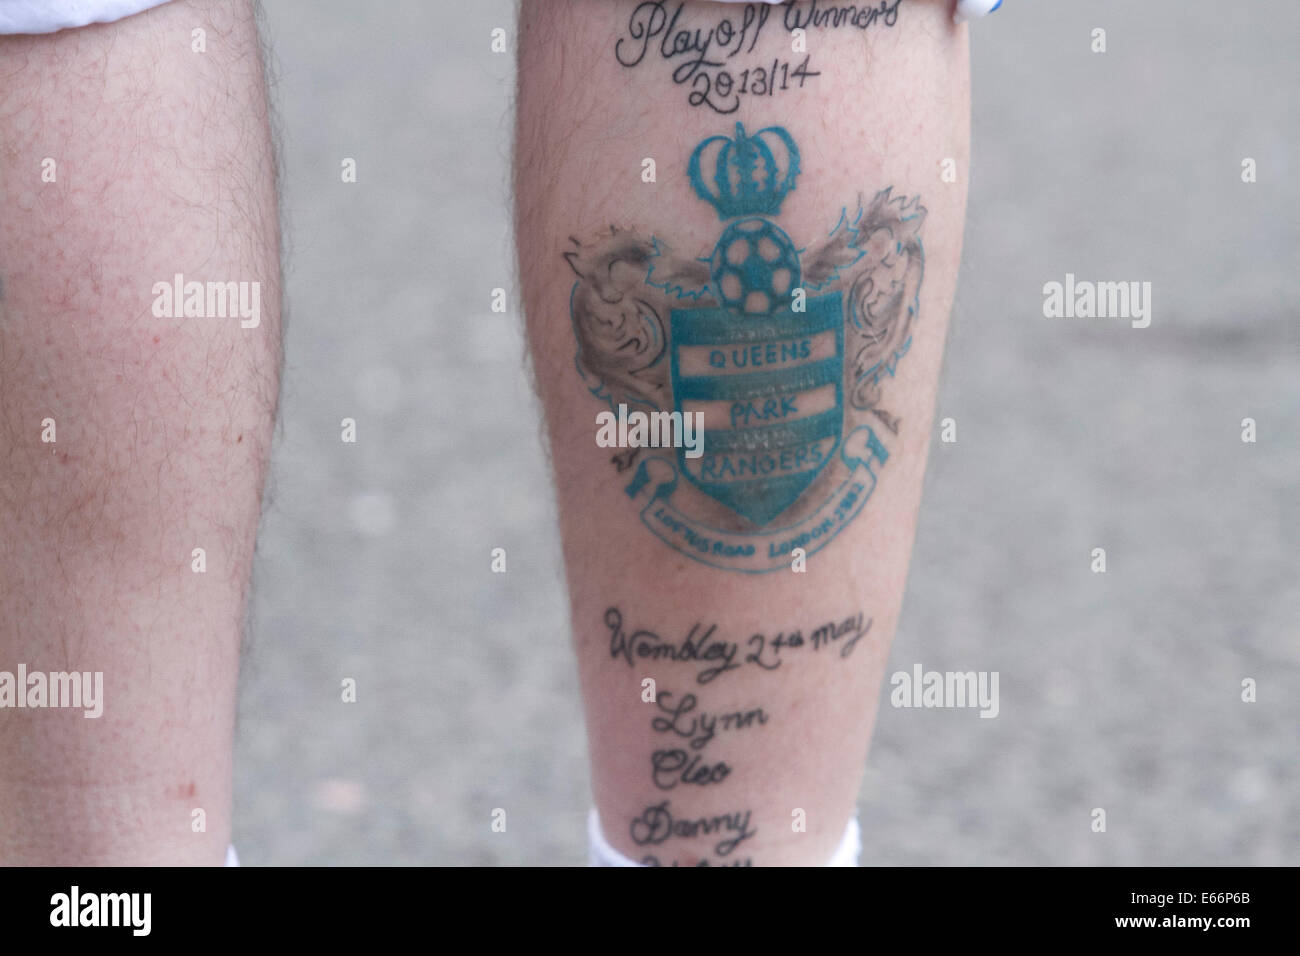 London,UK. 16th August 2014. A supporter with the Queens Park Rangers club crest tattooed on his leg. Football supporters arrive on the opening day of the English football league season fixture between Queens Park Rangers FC and Hull FC at Loftus Road London Credit:  amer ghazzal/Alamy Live News Stock Photo